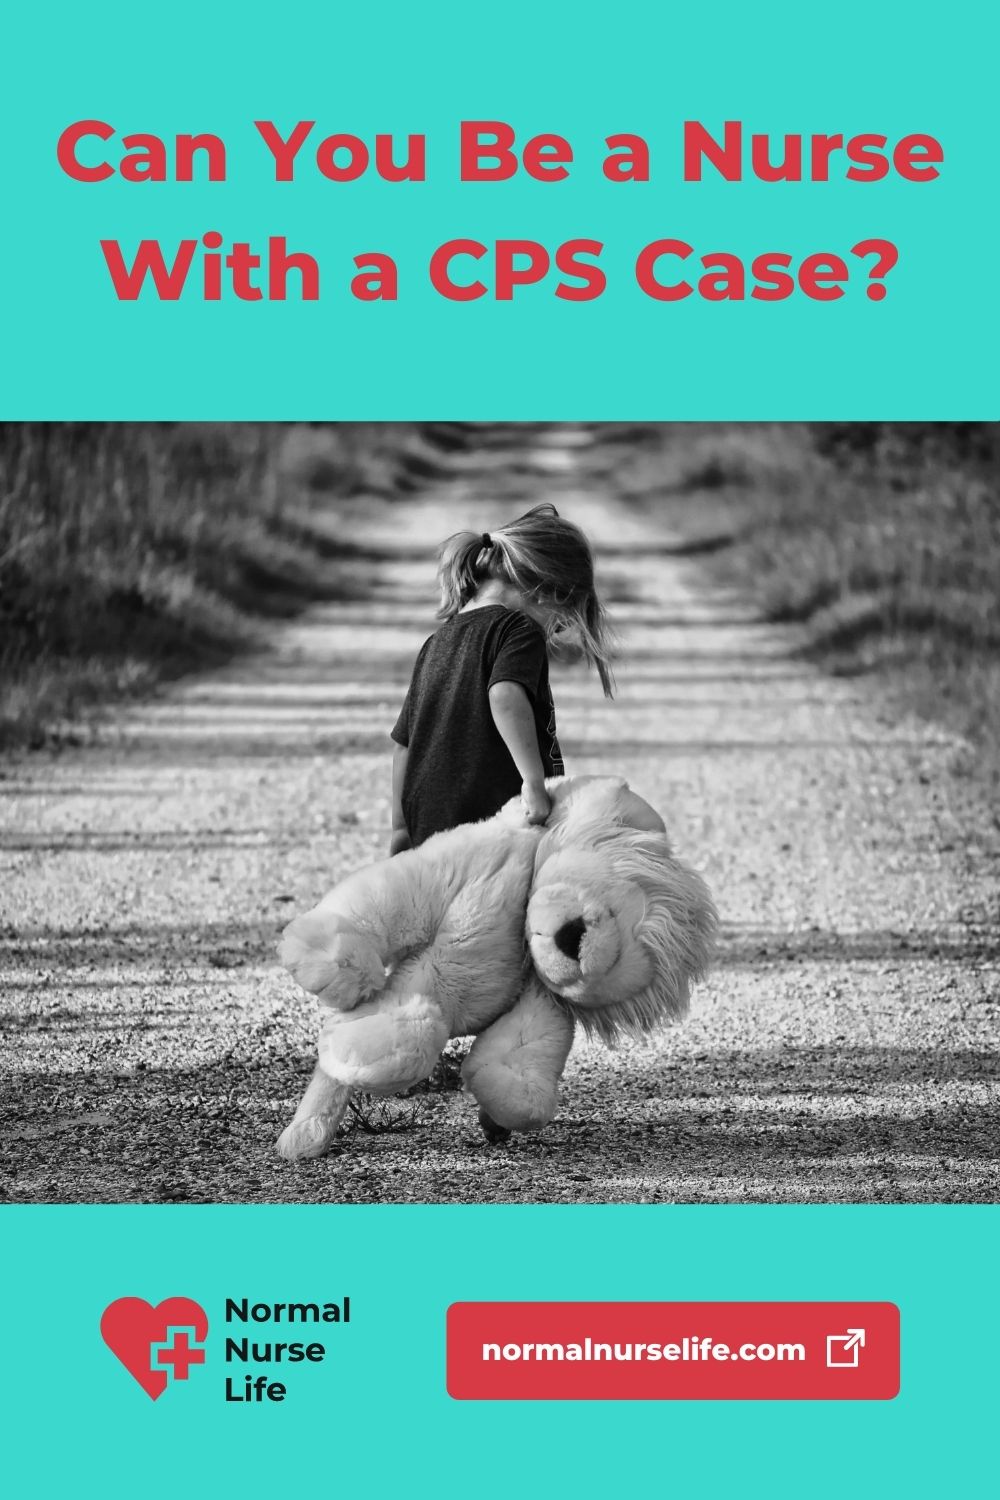 Can you be a nurse with a CPS case or not